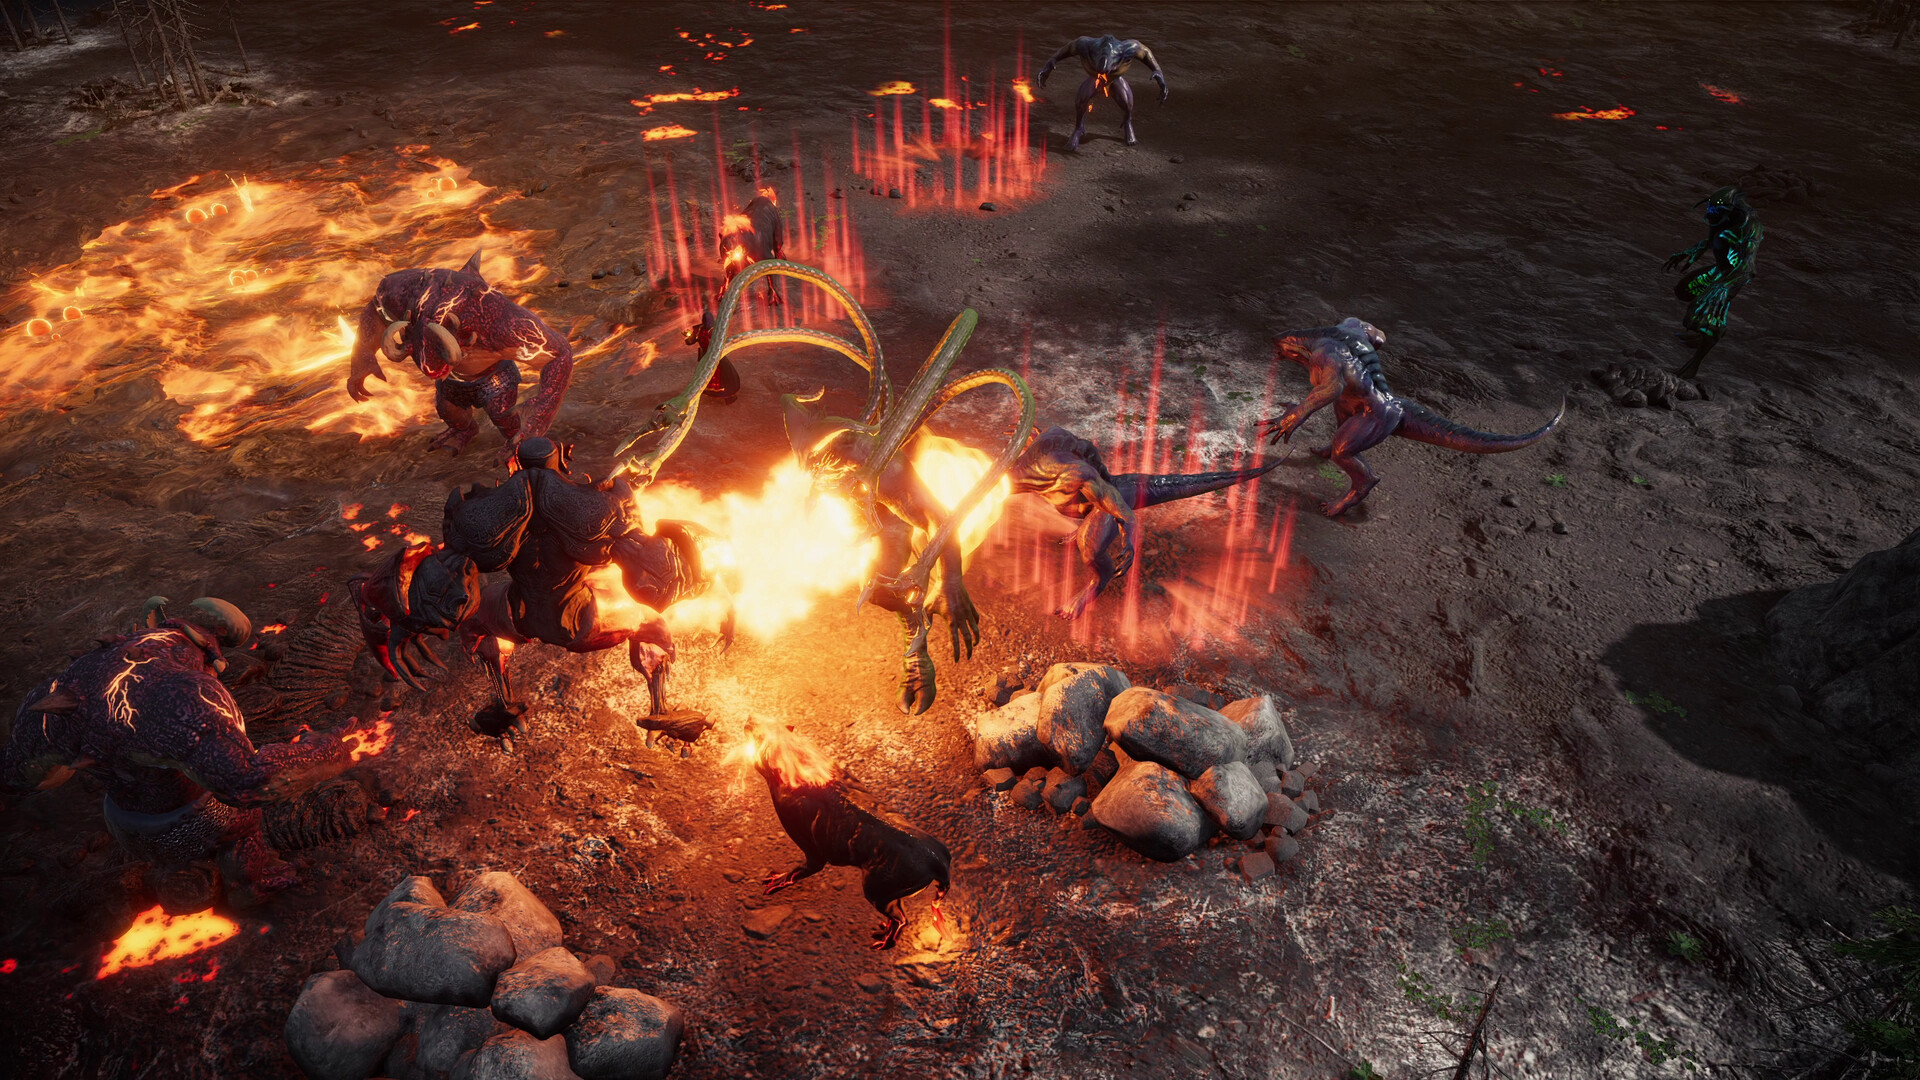 SpellForce: Conquest of Eo - Demon Scourge Featured Screenshot #1